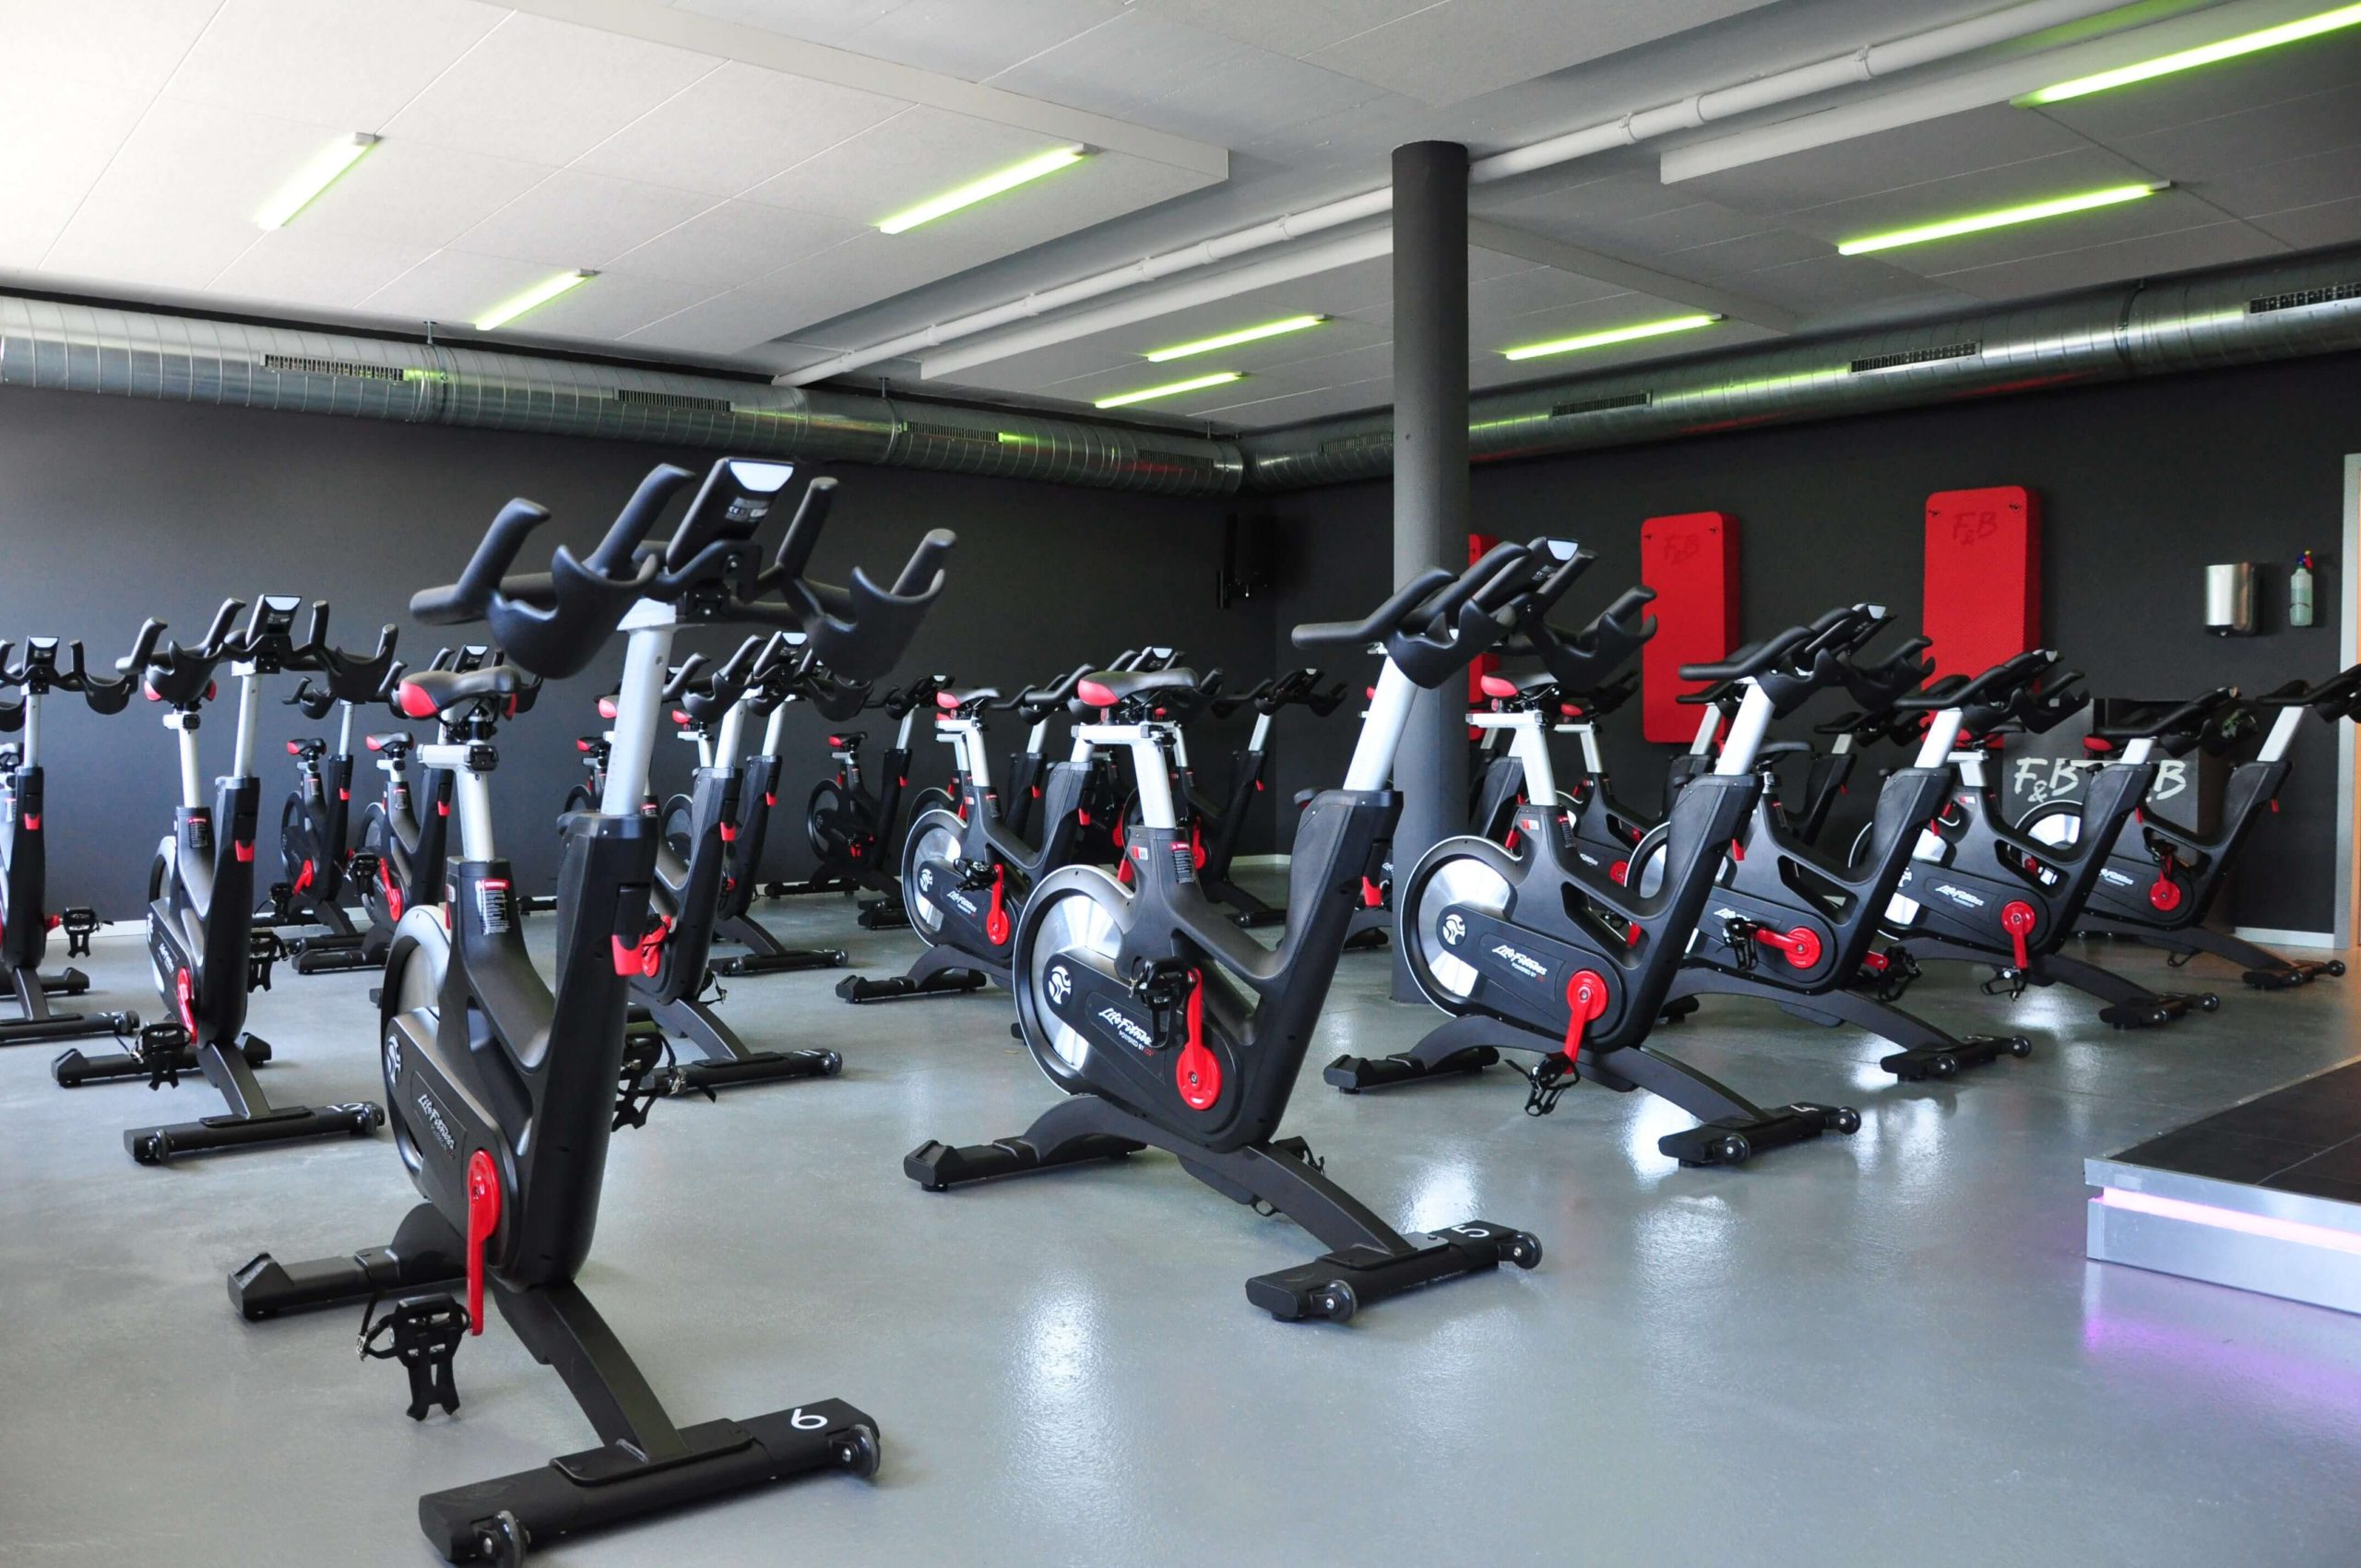 Opening a Cycle Gym